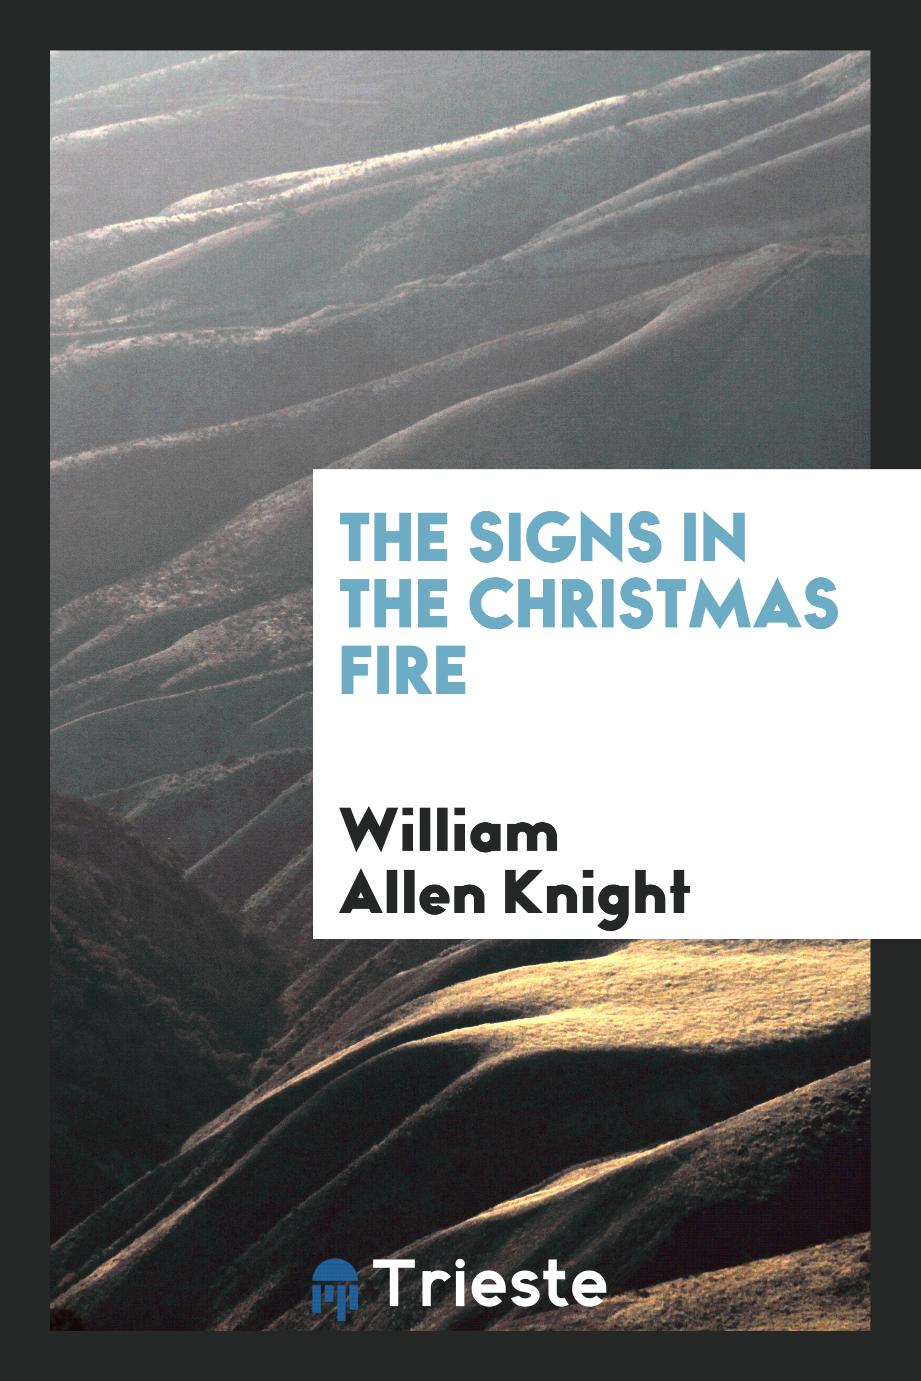 The signs in the Christmas fire